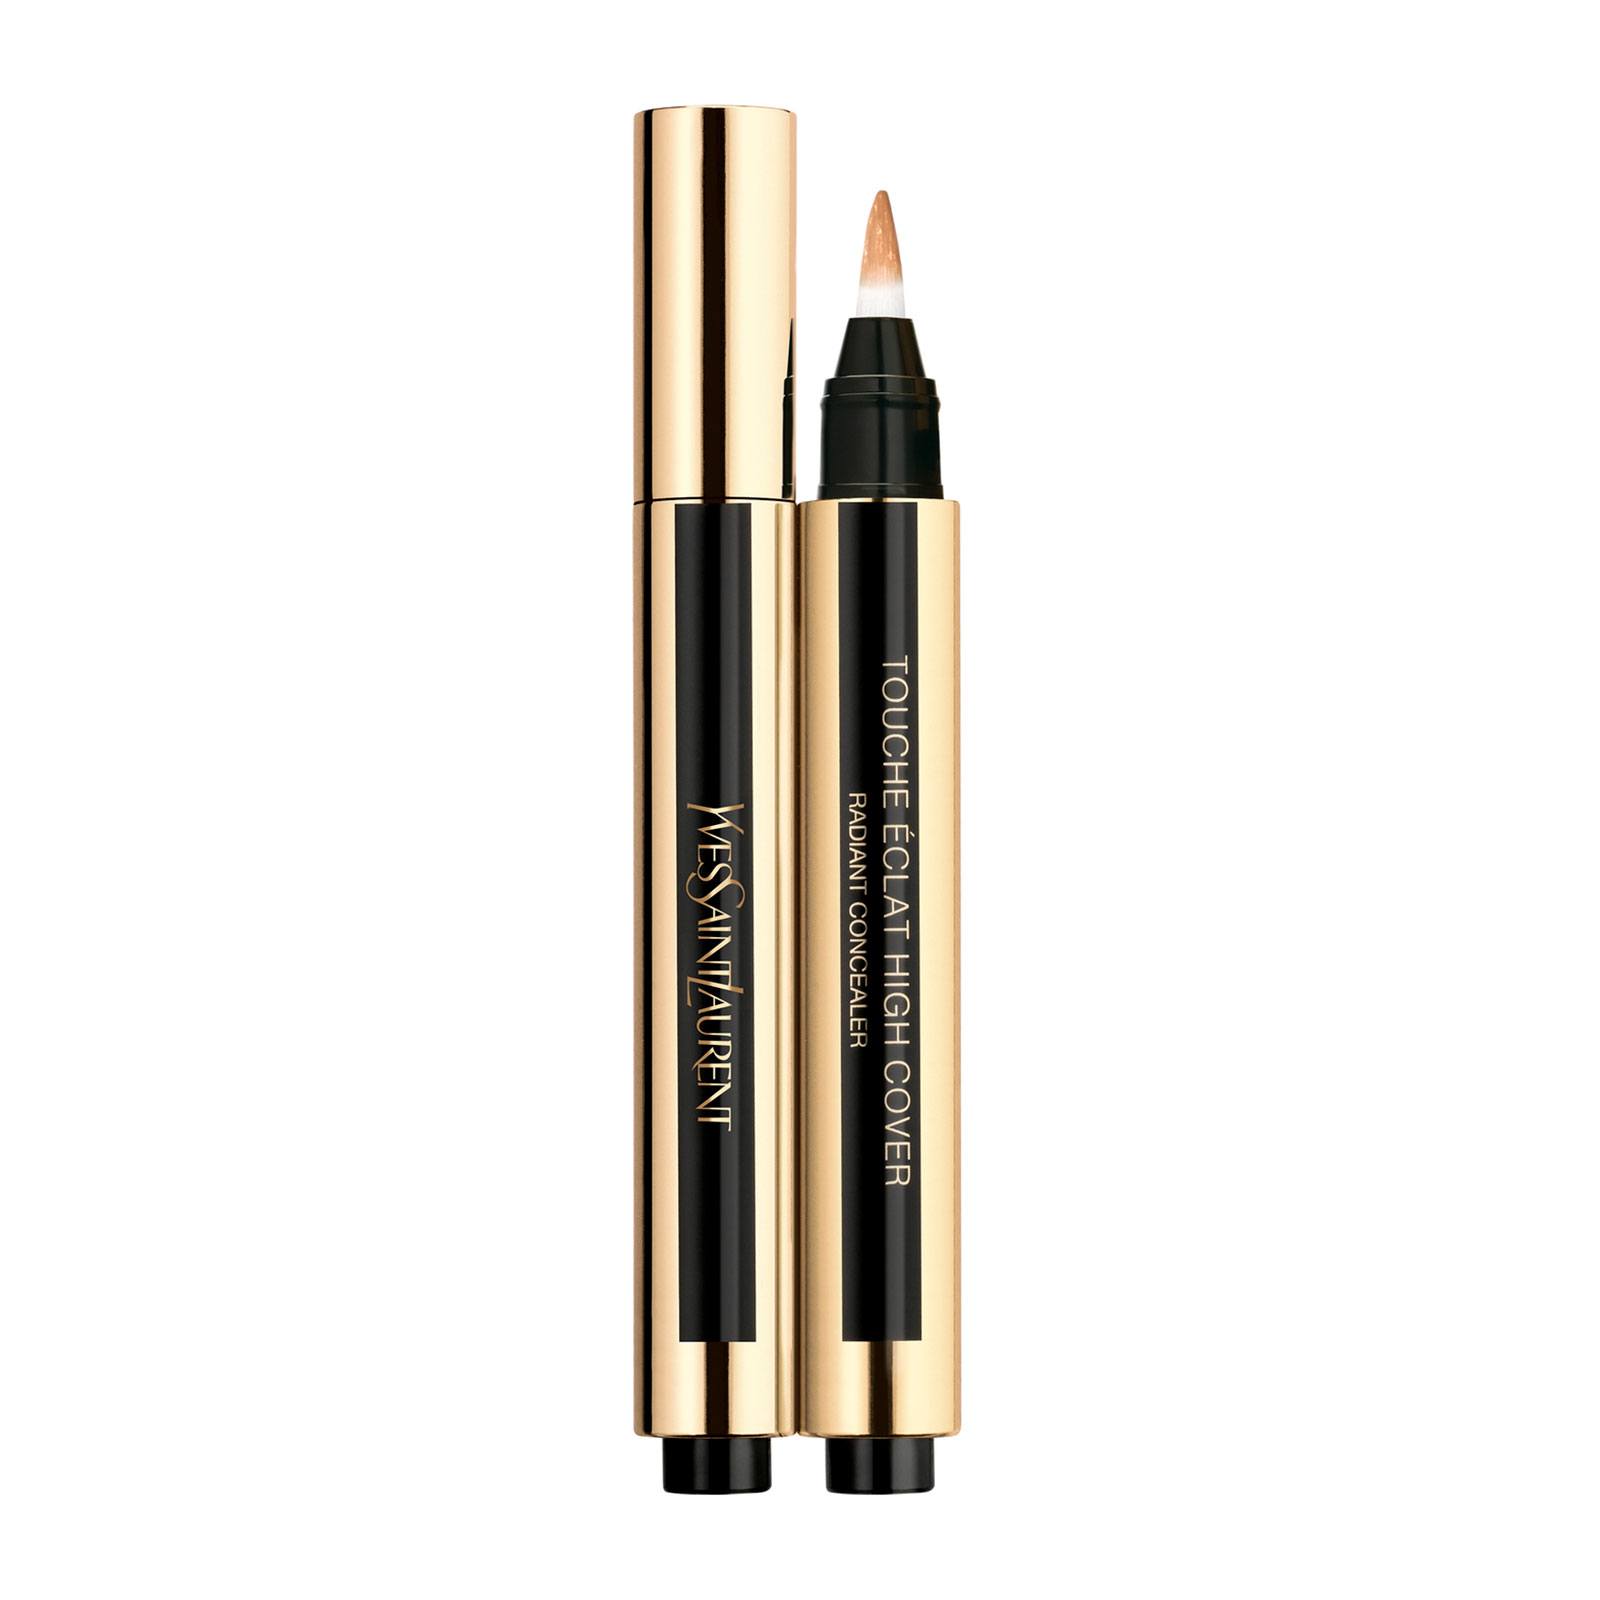 Ysl Beauty Touche Eclat High Cover Concealer 2.5Ml 5 Honey